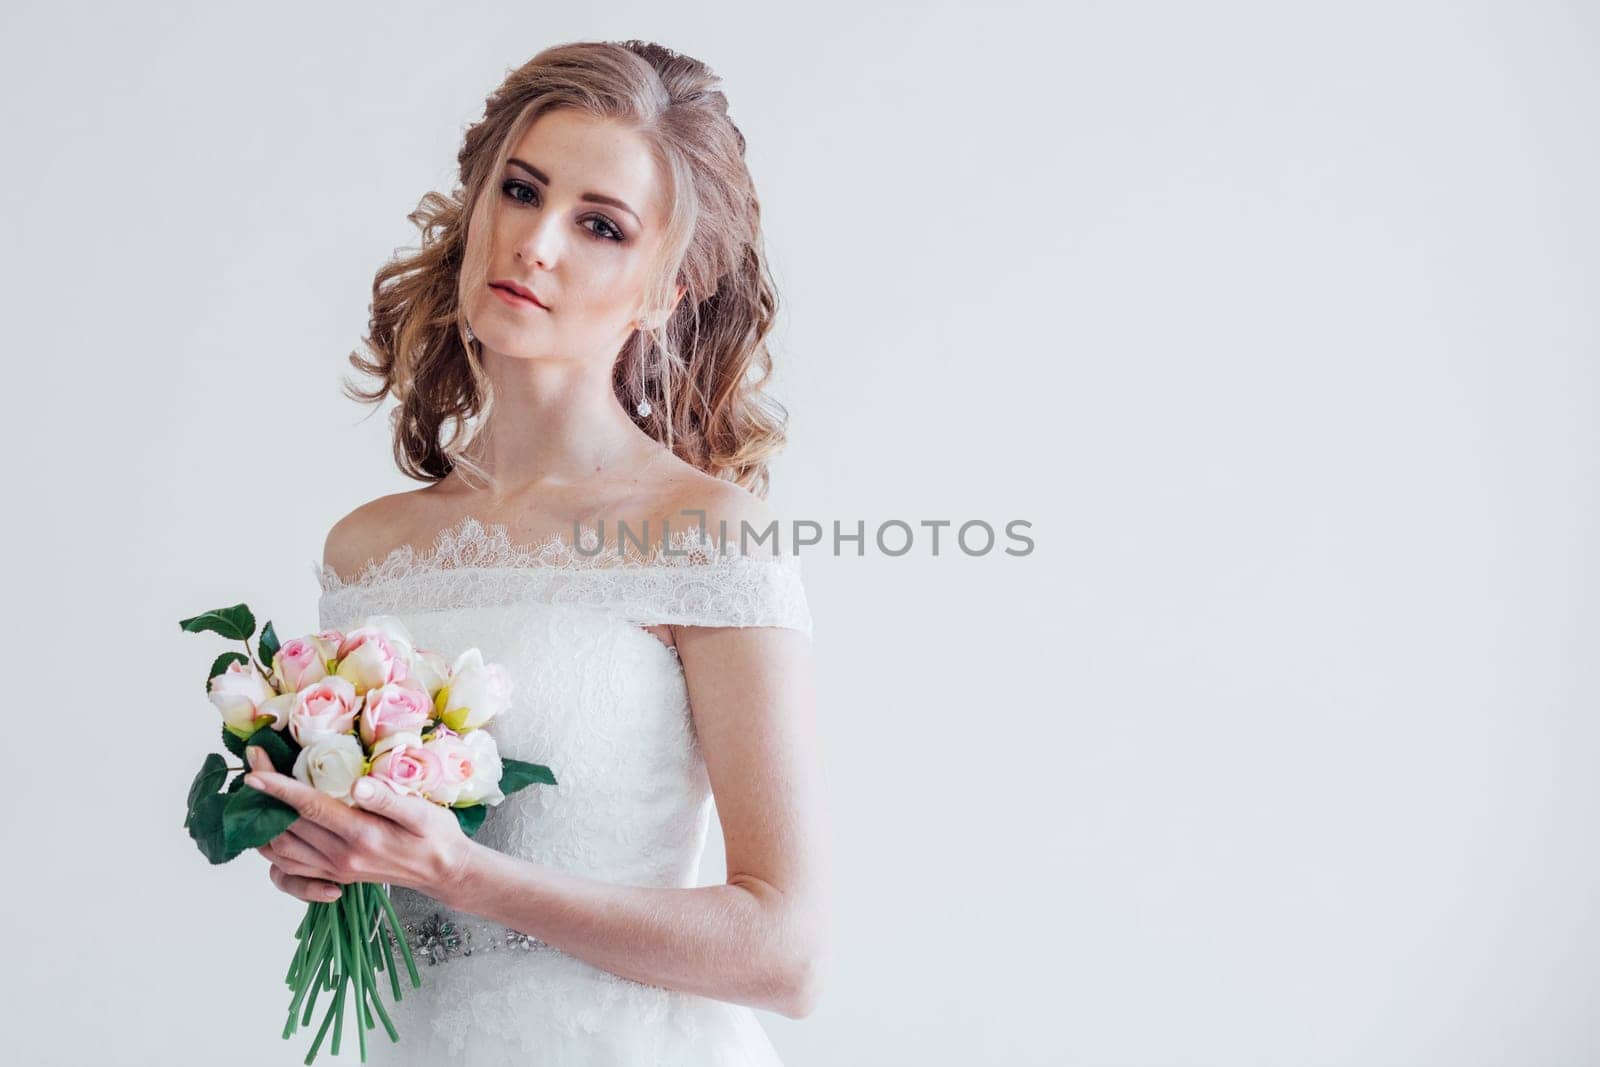 bride in wedding dress holding a bouquet of flowers in her hands